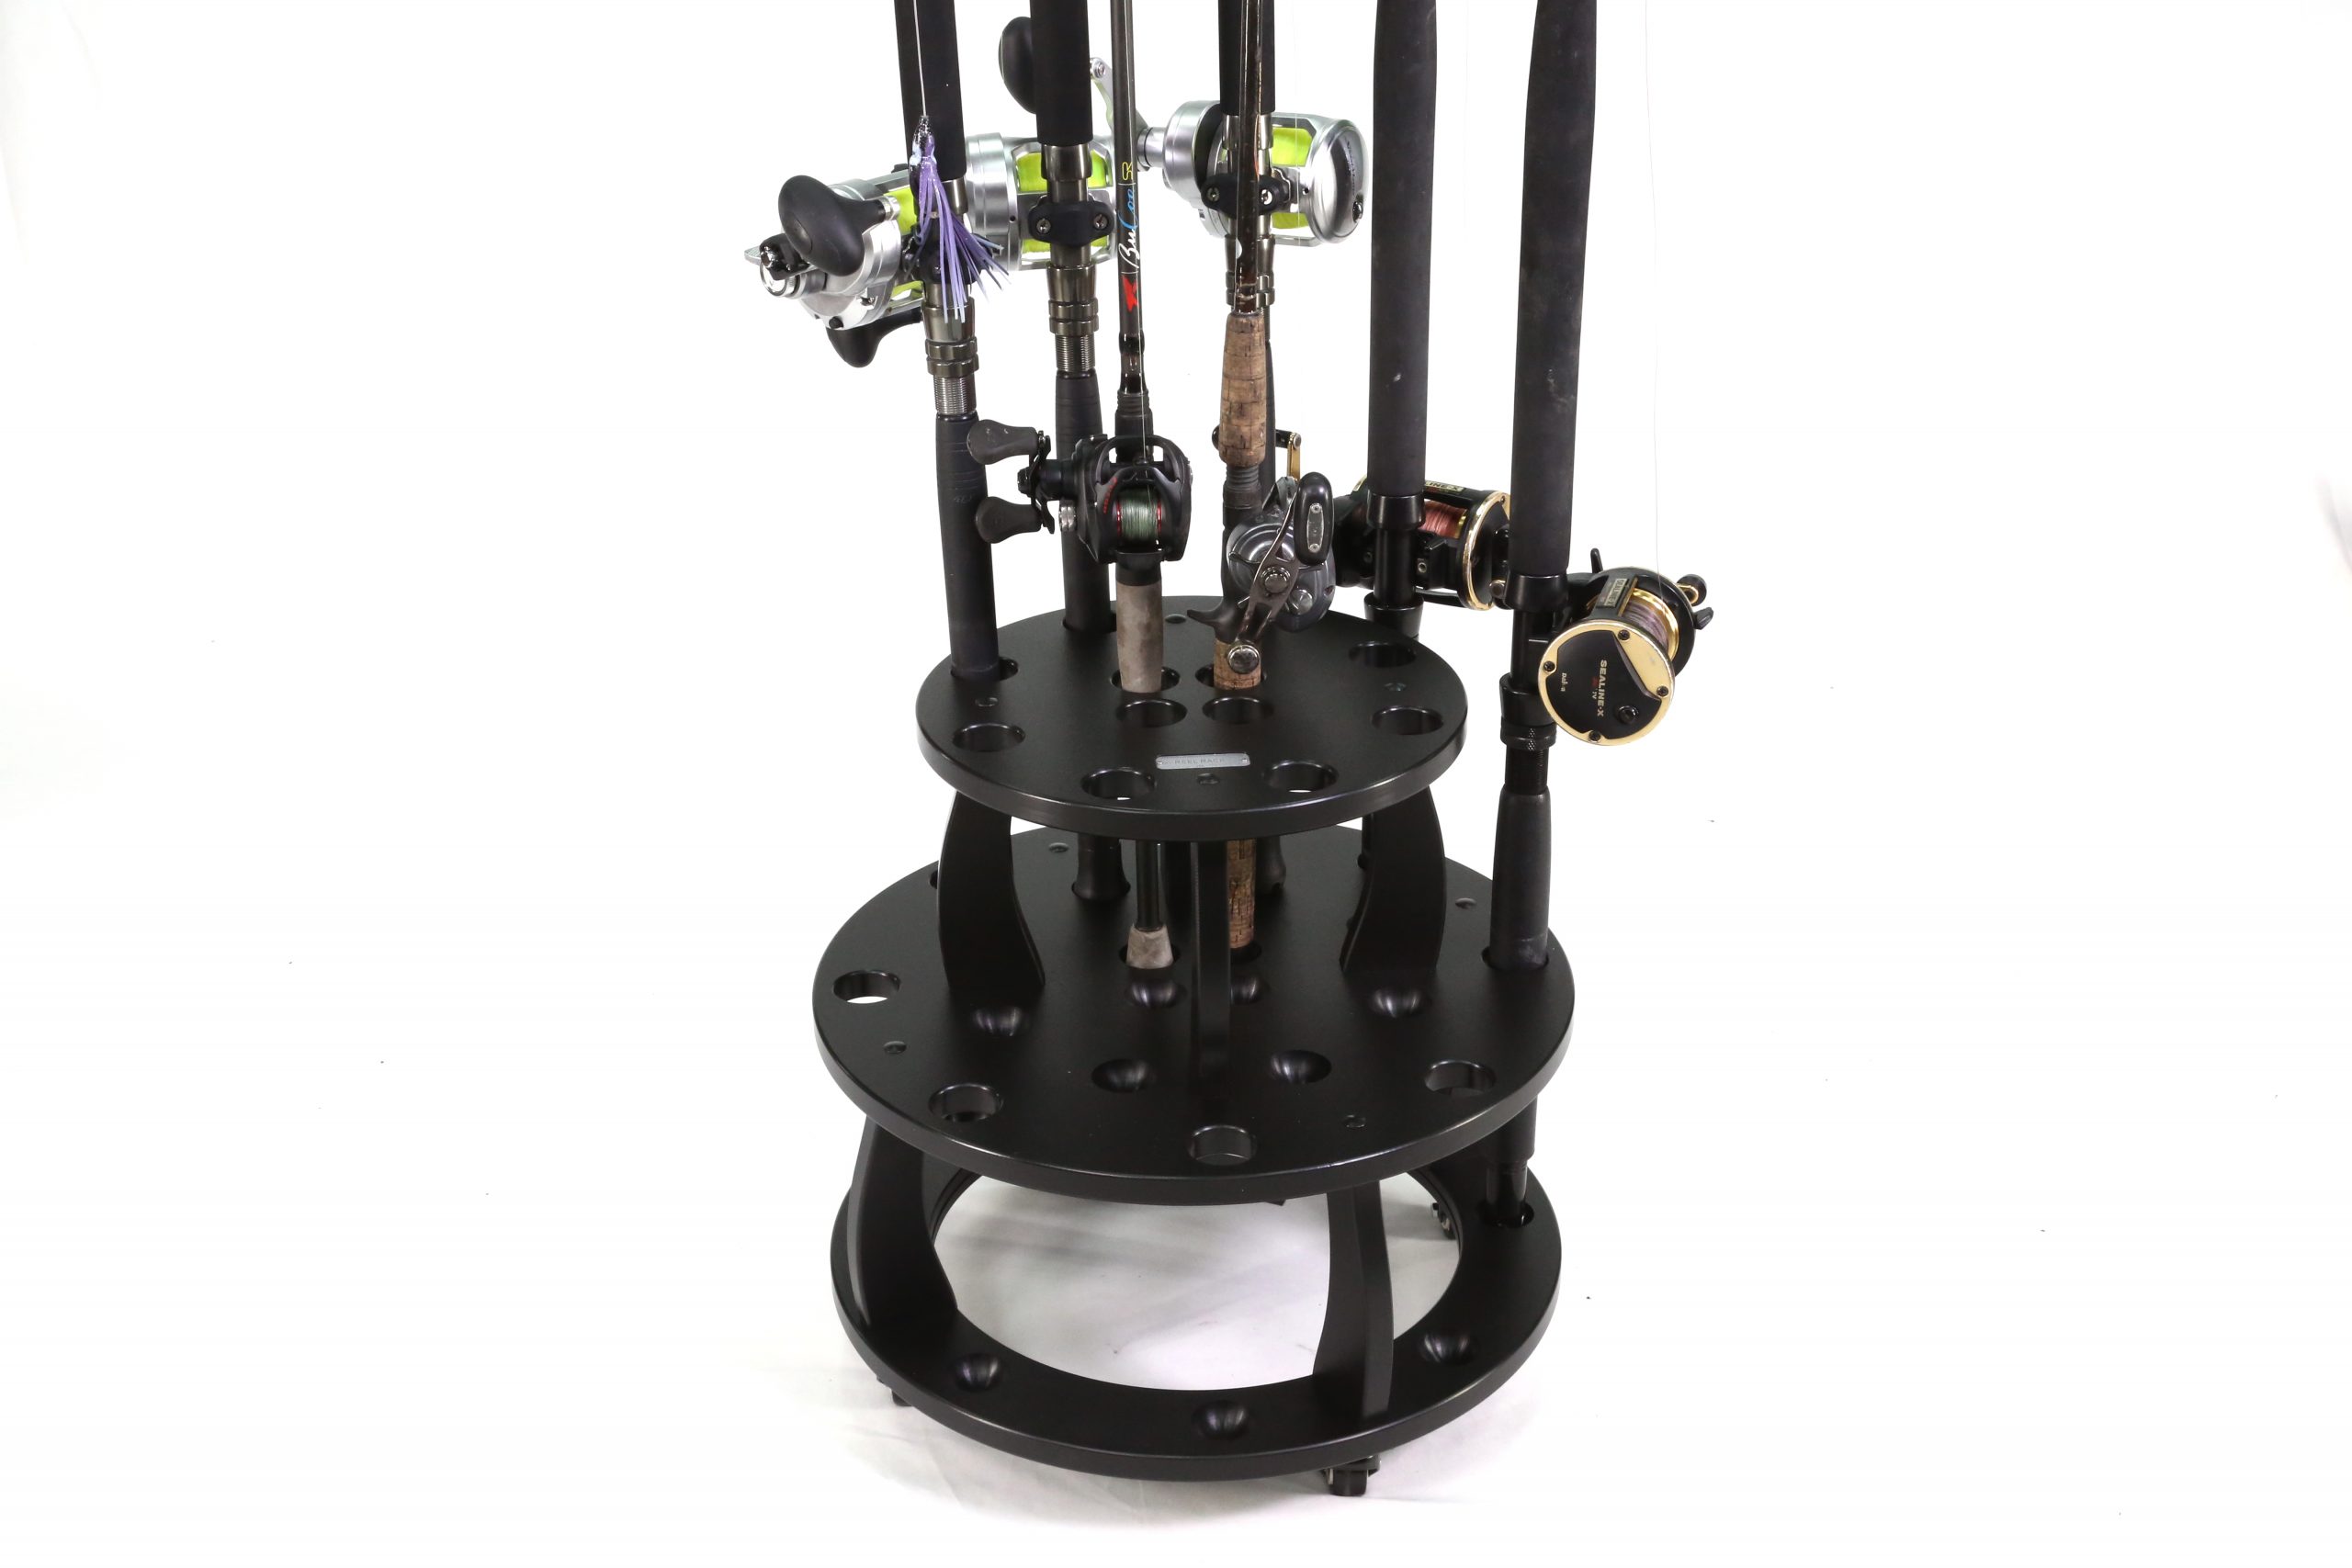 Round Rod Holder - Varied Height Design For 20 Rods & Reels · My